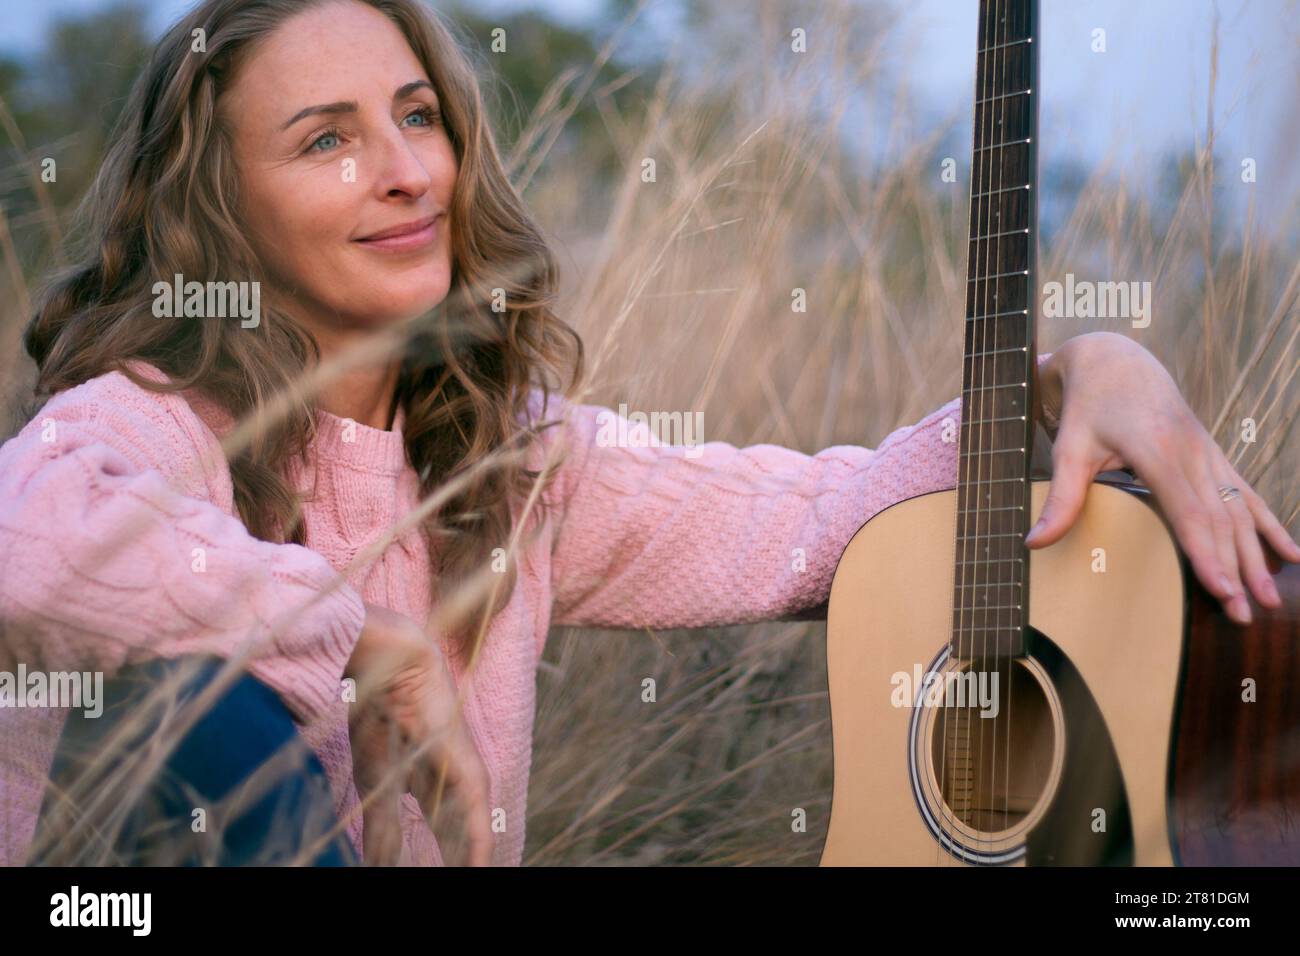 Portrait of beautiful woman musician with acoustic guitar sitting on dry grass in field. Relaxing outdoors on warm autumn evening at sunset. Attractiv Stock Photo